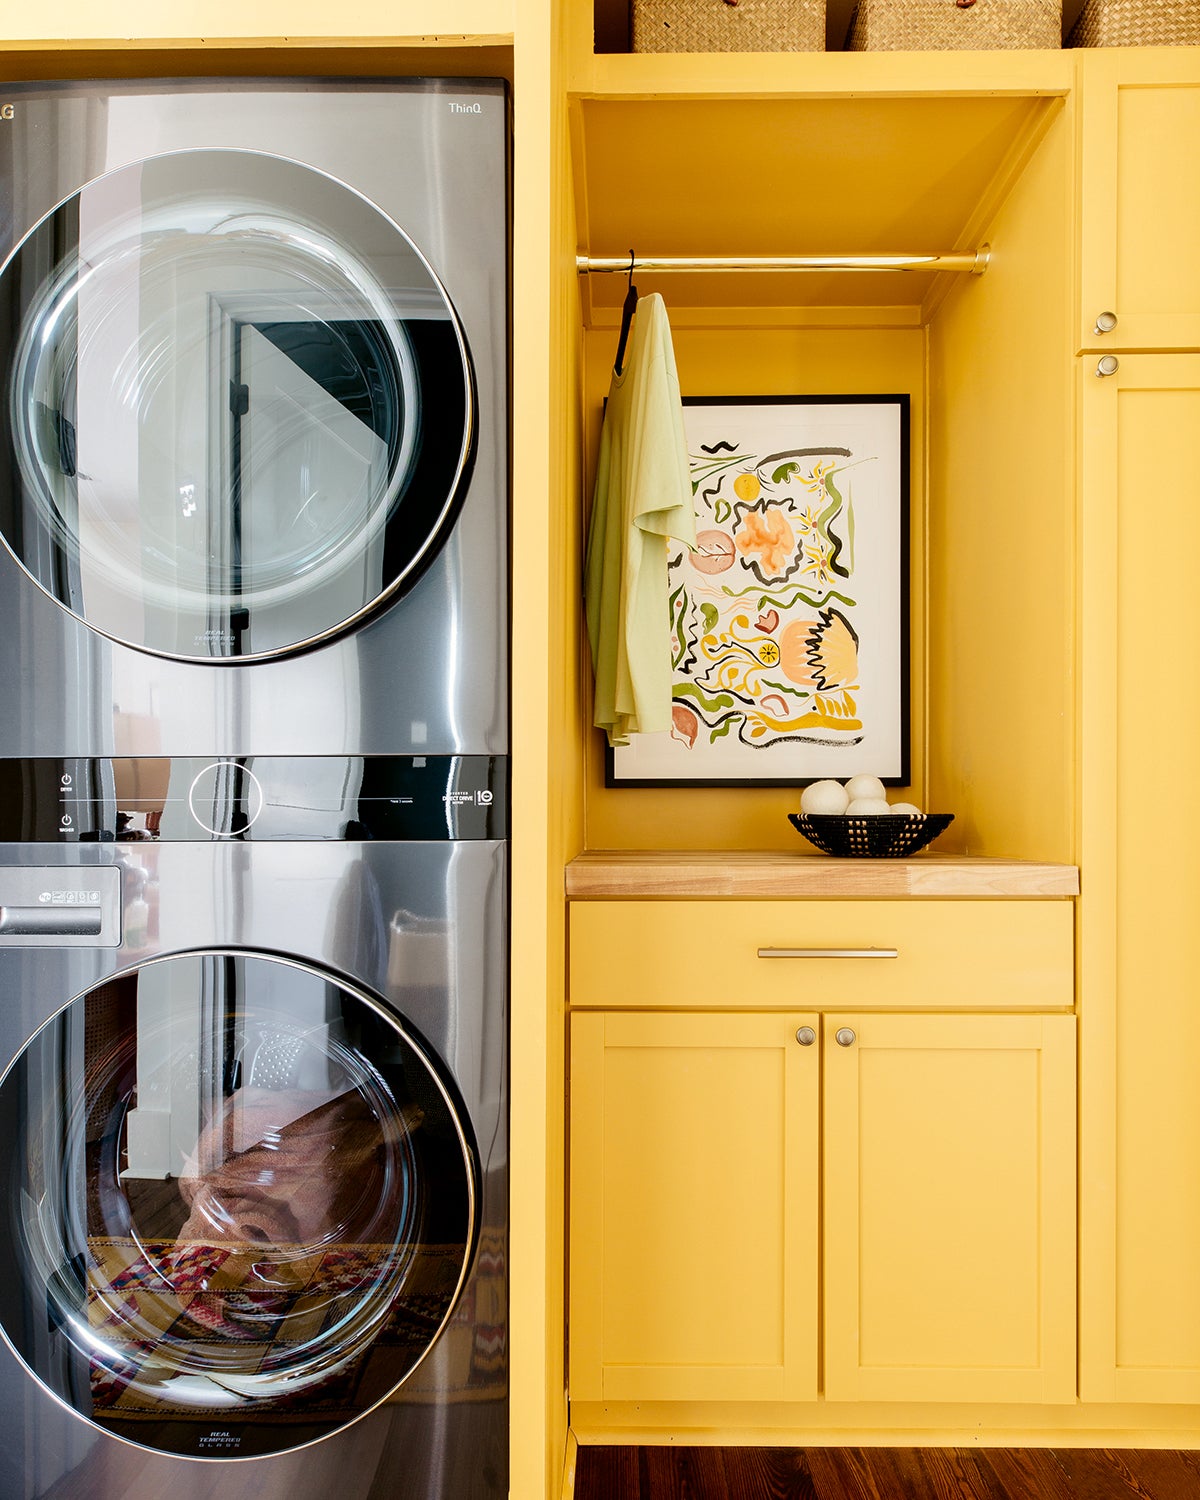 Laundry room with yellow cabinets